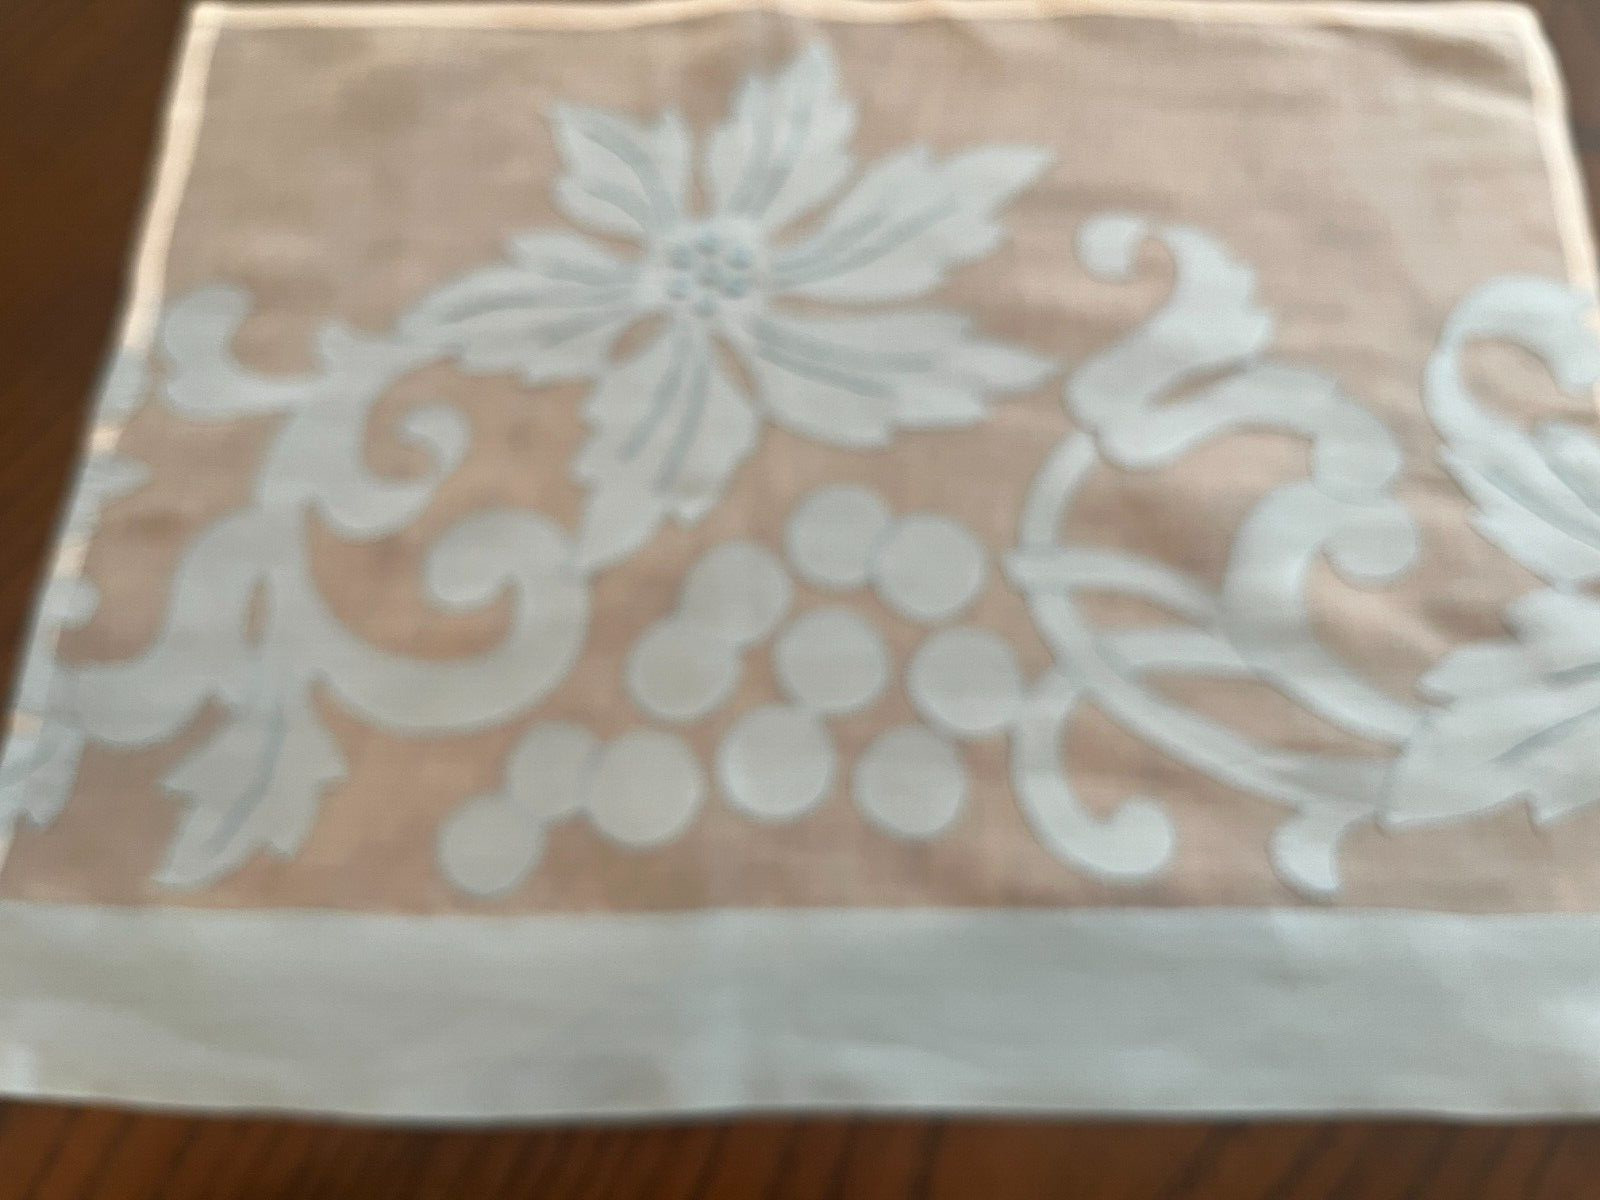 VTG MADEIRA PORTUGAL Hand Embroidery Applique Organdy  6 - Placemats  Light Blue